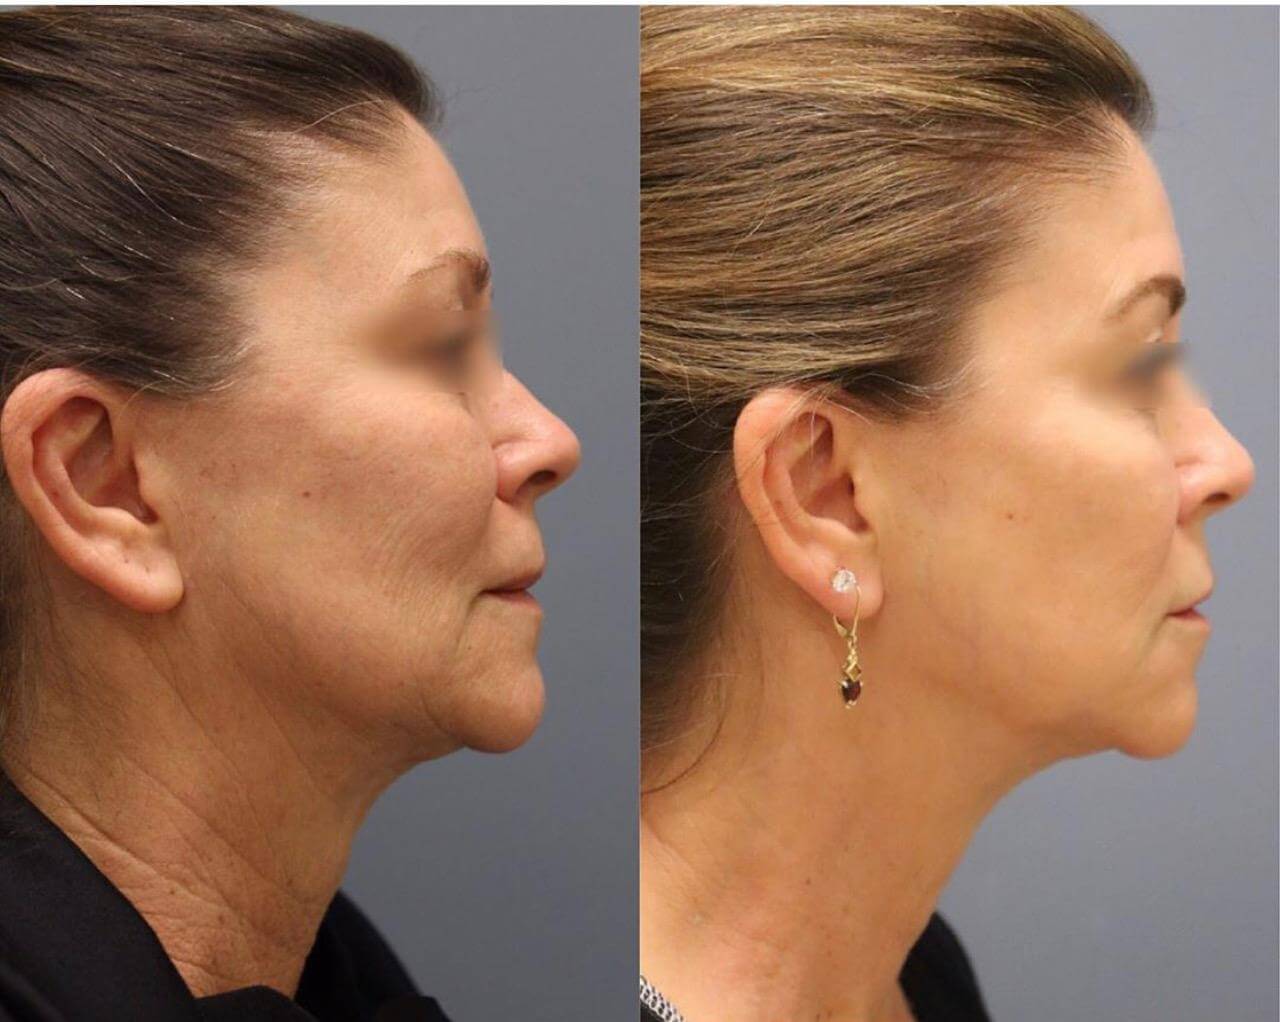 Before and after photos of Fractional RF with Pixel8 Skin Tightening treatment